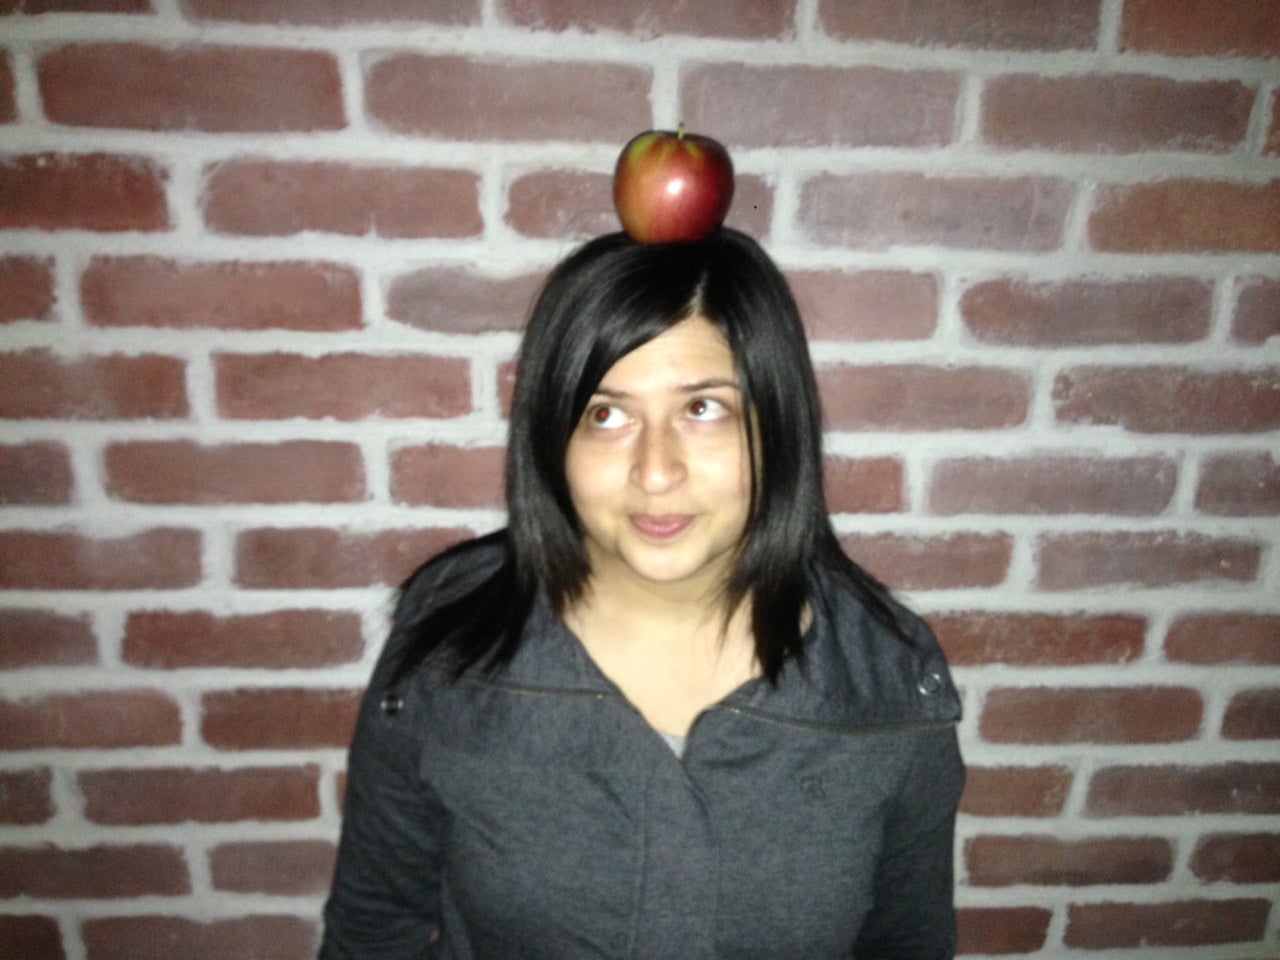 Uppi with an apple on her head